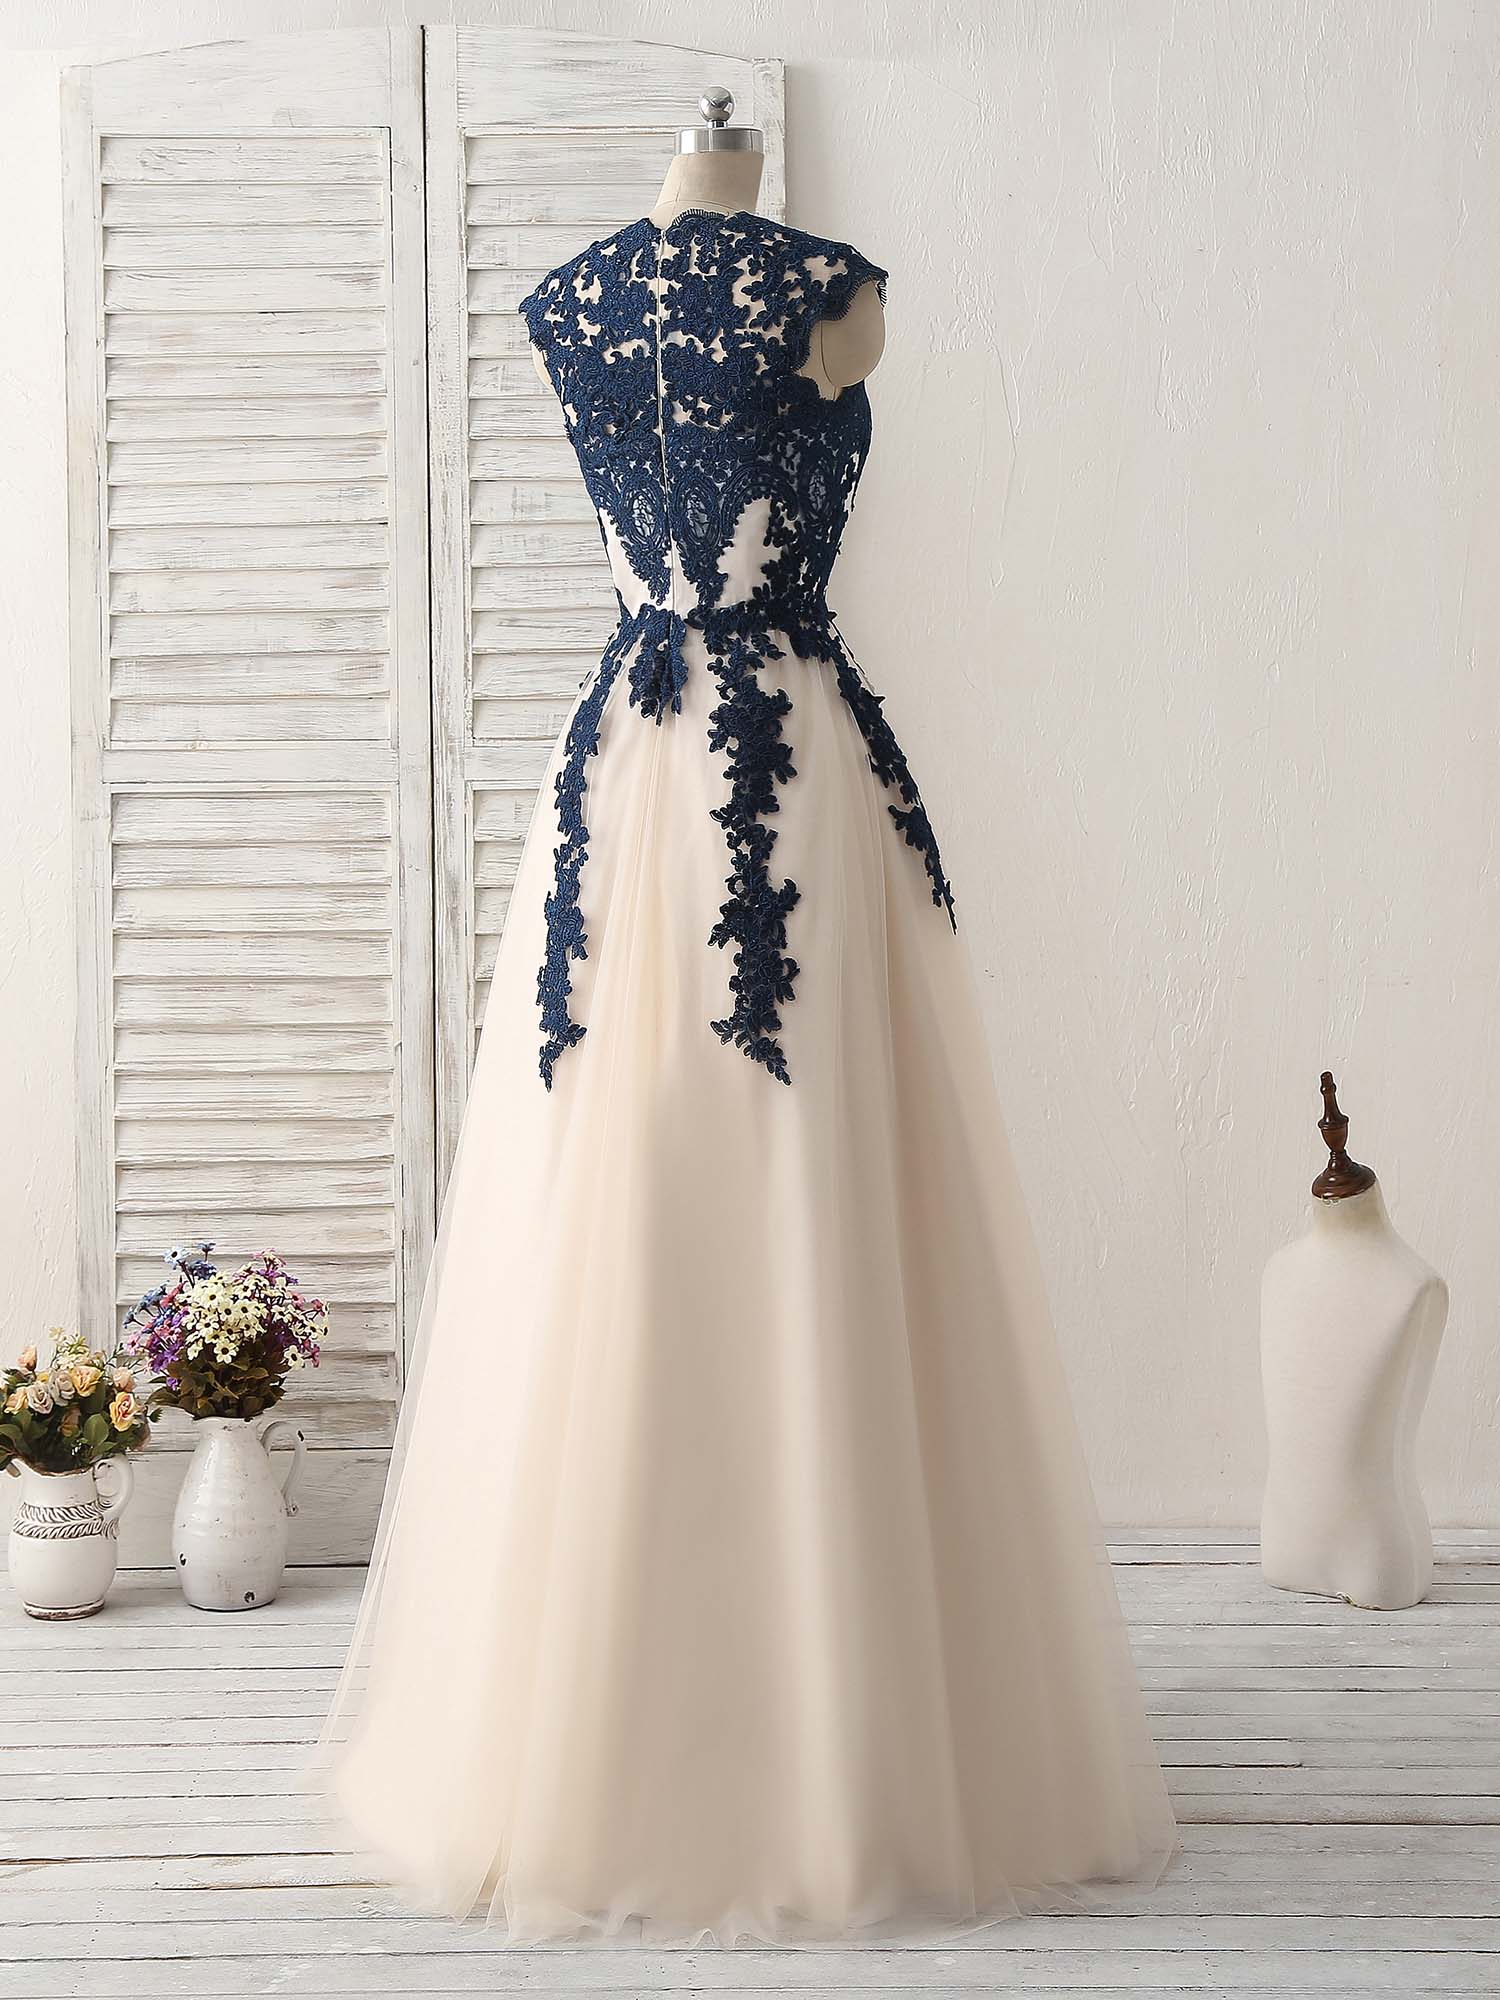 Prom Dresses Red, Dark Blue Lace Applique Tulle Long Prom Dress Blue Bridesmaid Dress